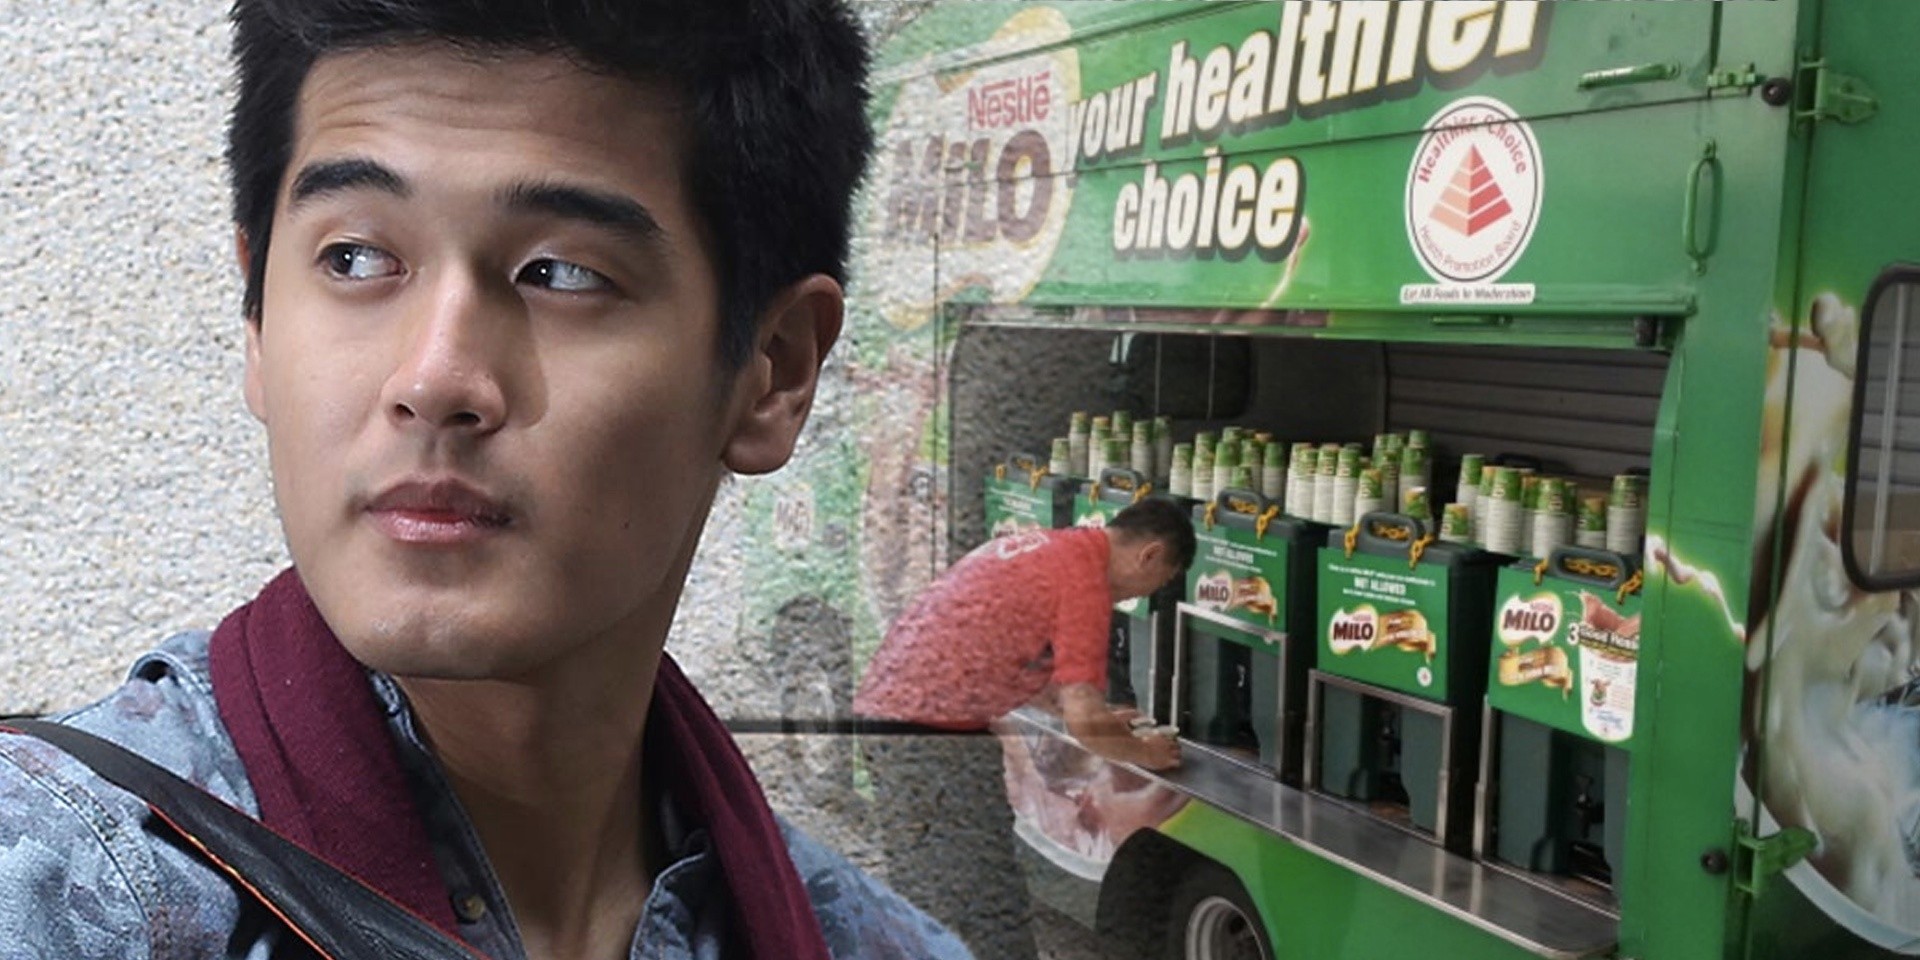 There's really a Milo party in town for Nathan Hartono